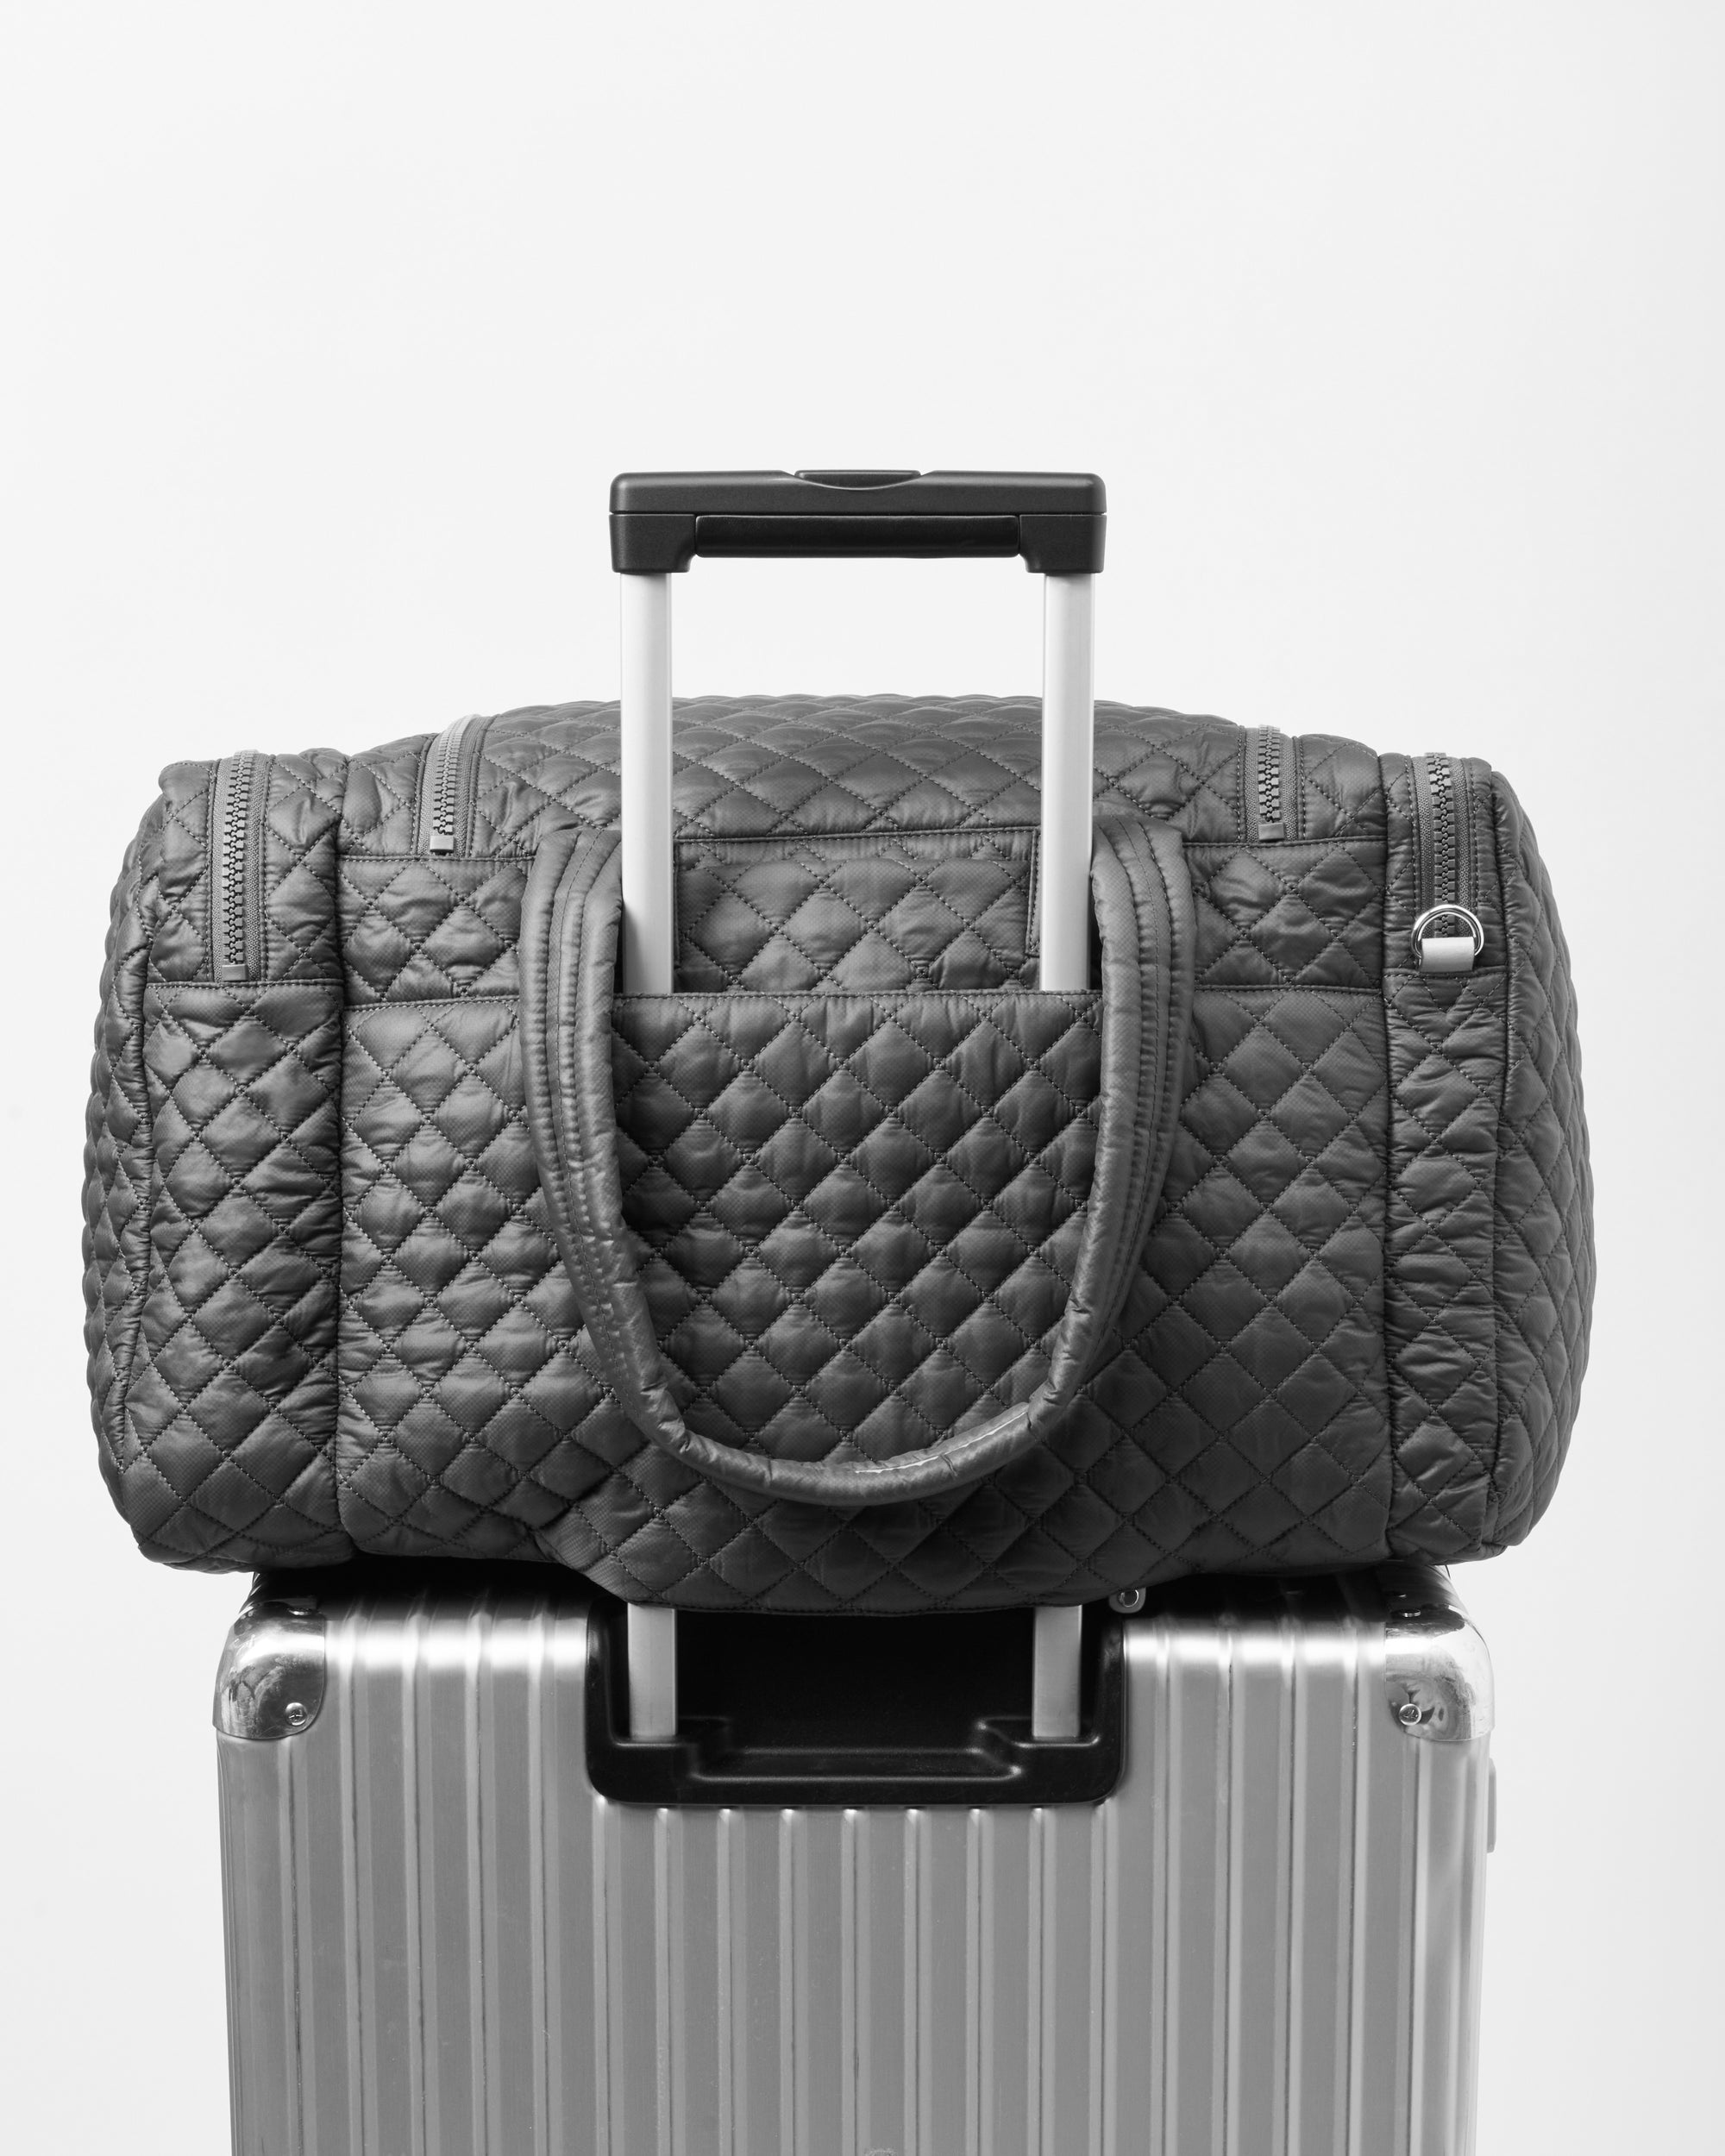 Carry-On Quilted Sustainable Luggage, Black Travel Suitcase